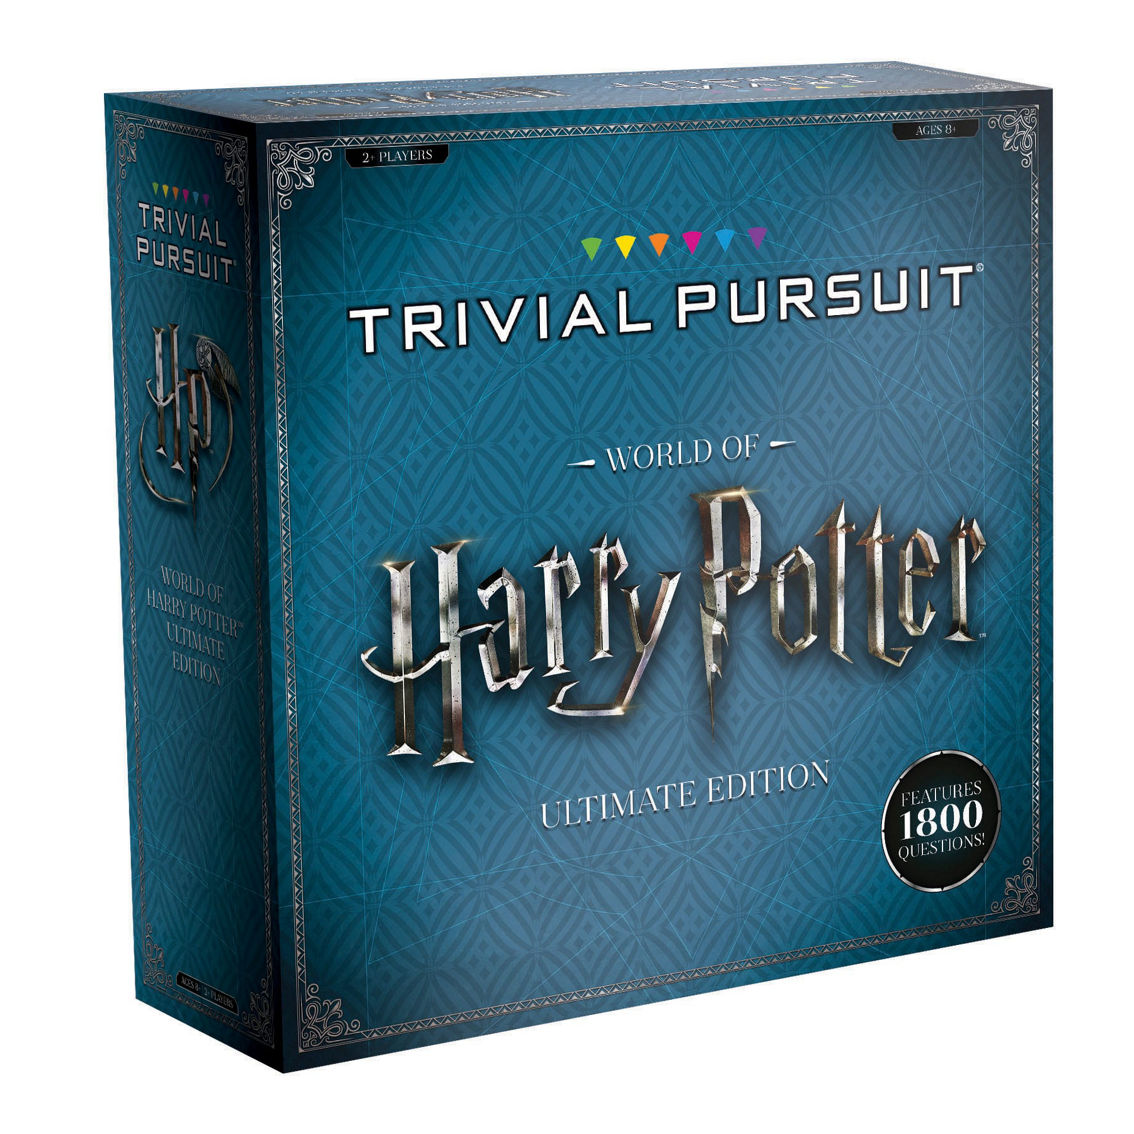 TRIVIAL PURSUIT®: World of Harry Potter Ultimate Edition - Image 2 of 5